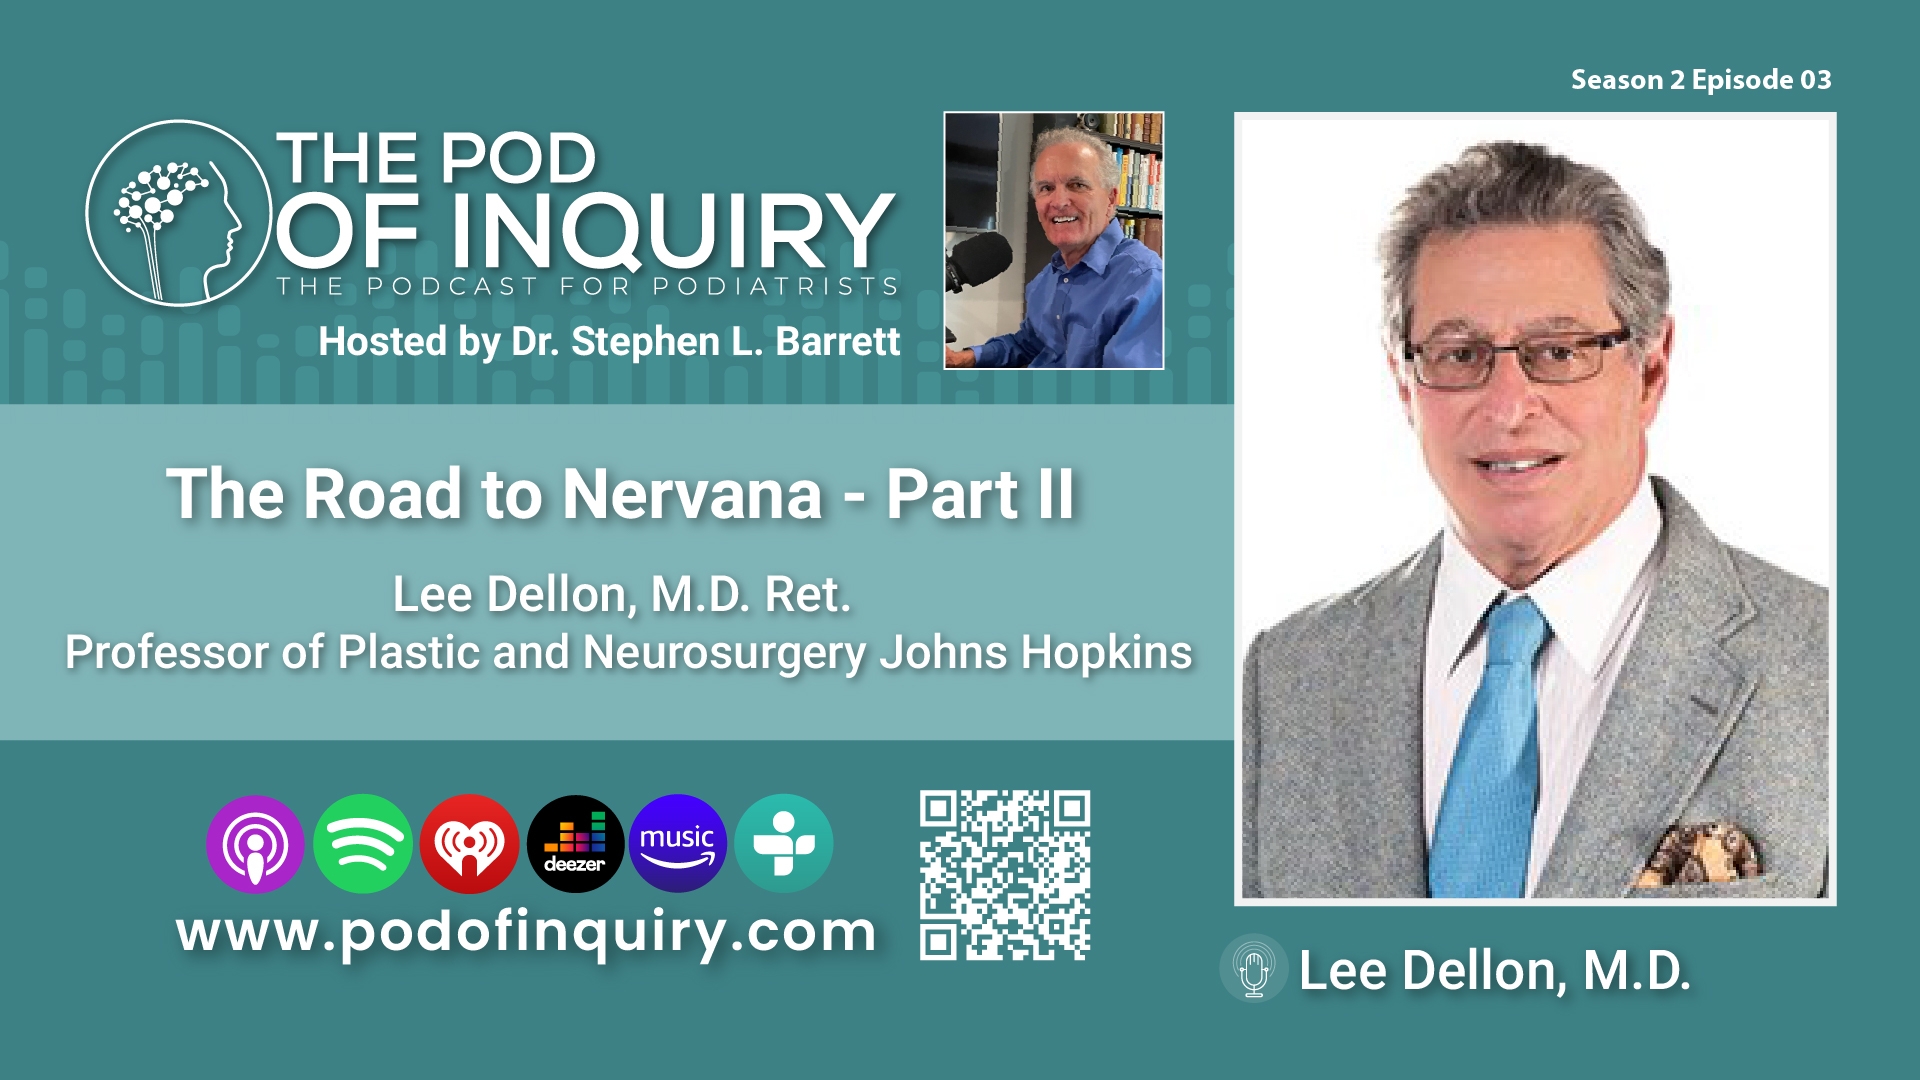 The Road to Nervana with Dr. Lee Dellon Part IPOD of Inquiry - Podcast for Podiatrist